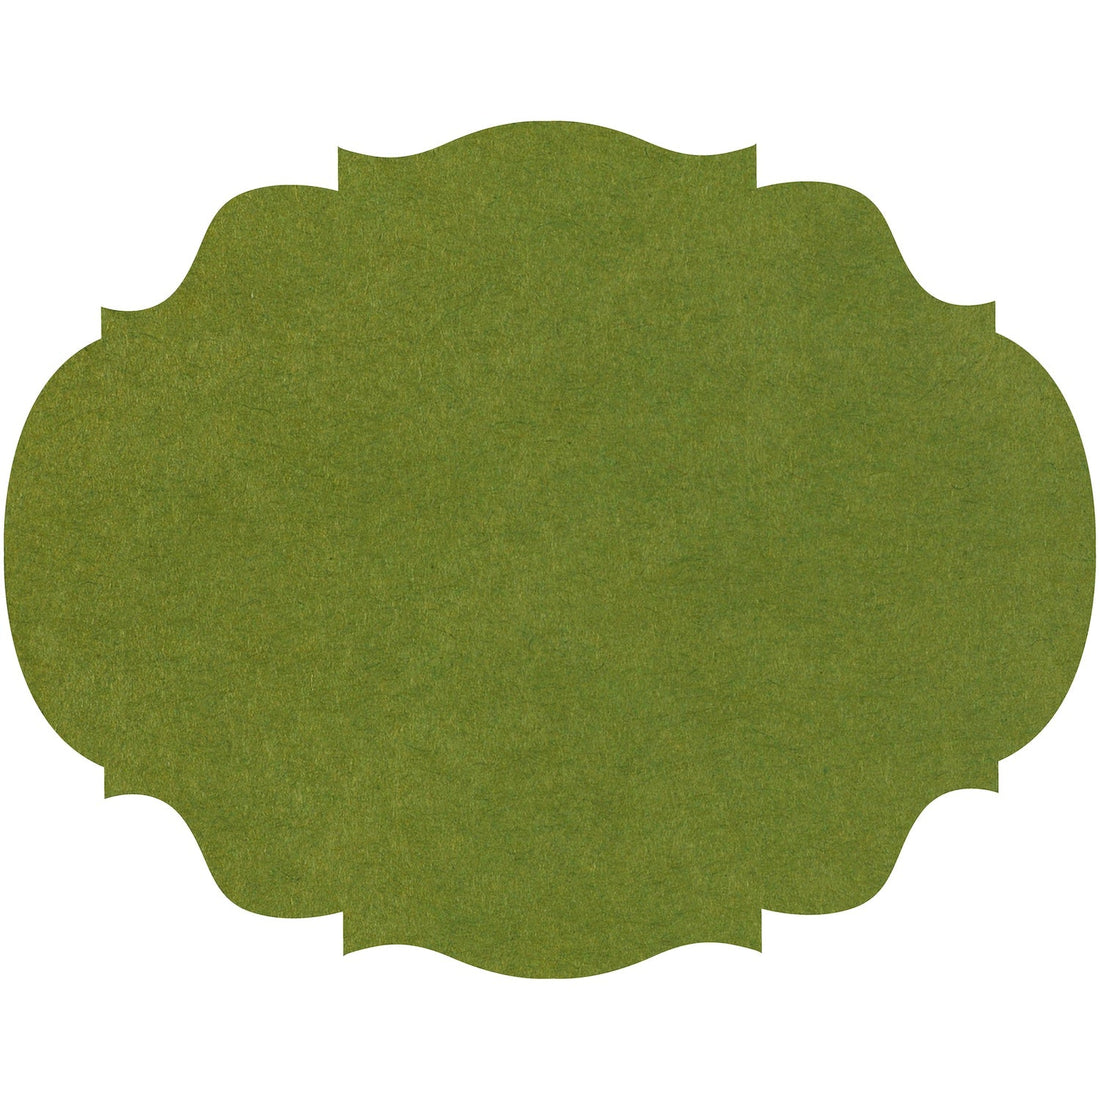 14&quot; x 18&quot; Die-cut green french frame placemat on white background.